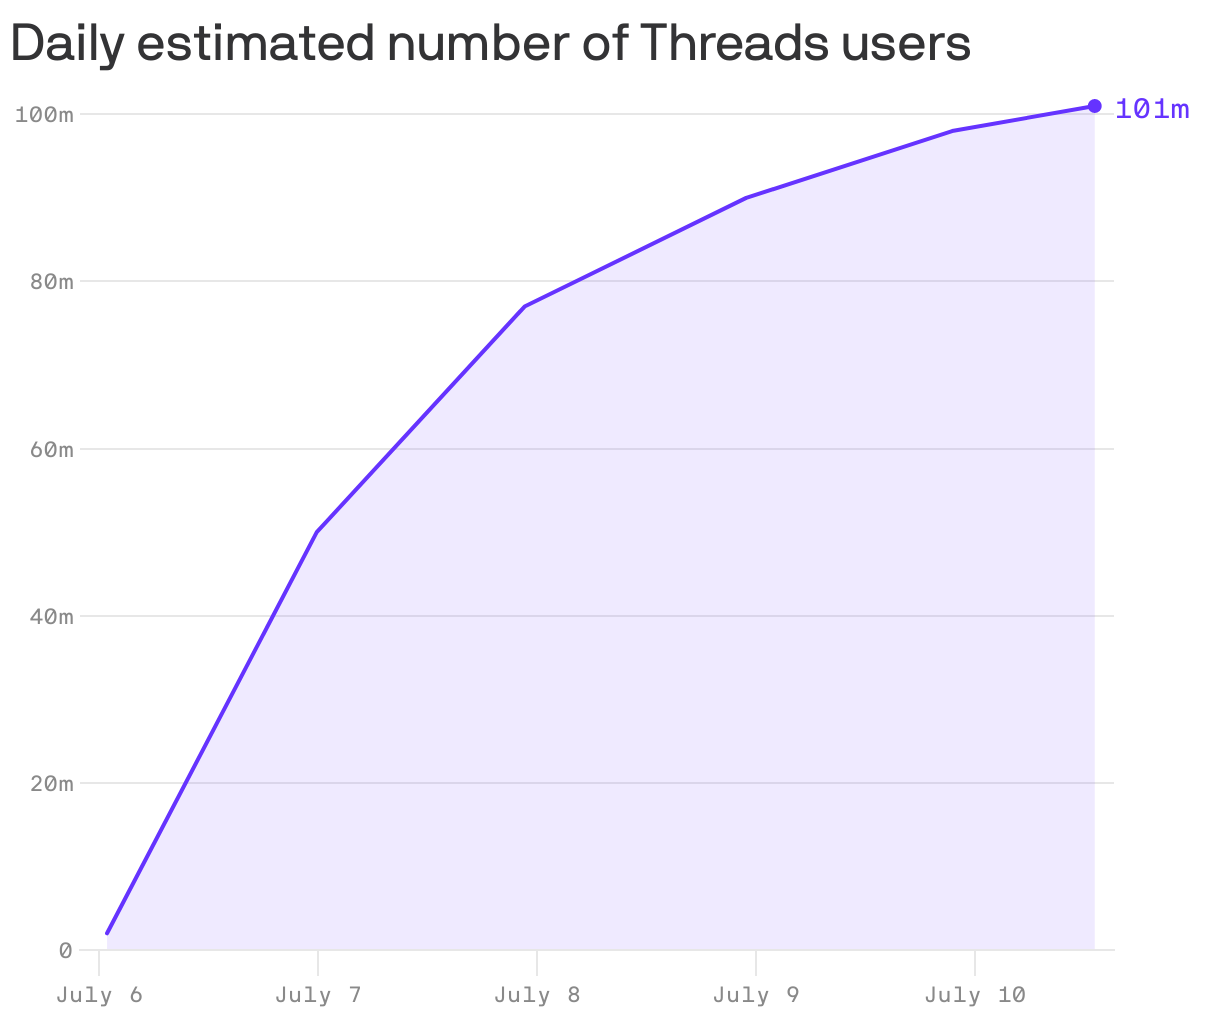 Daily estimated number of Threads users